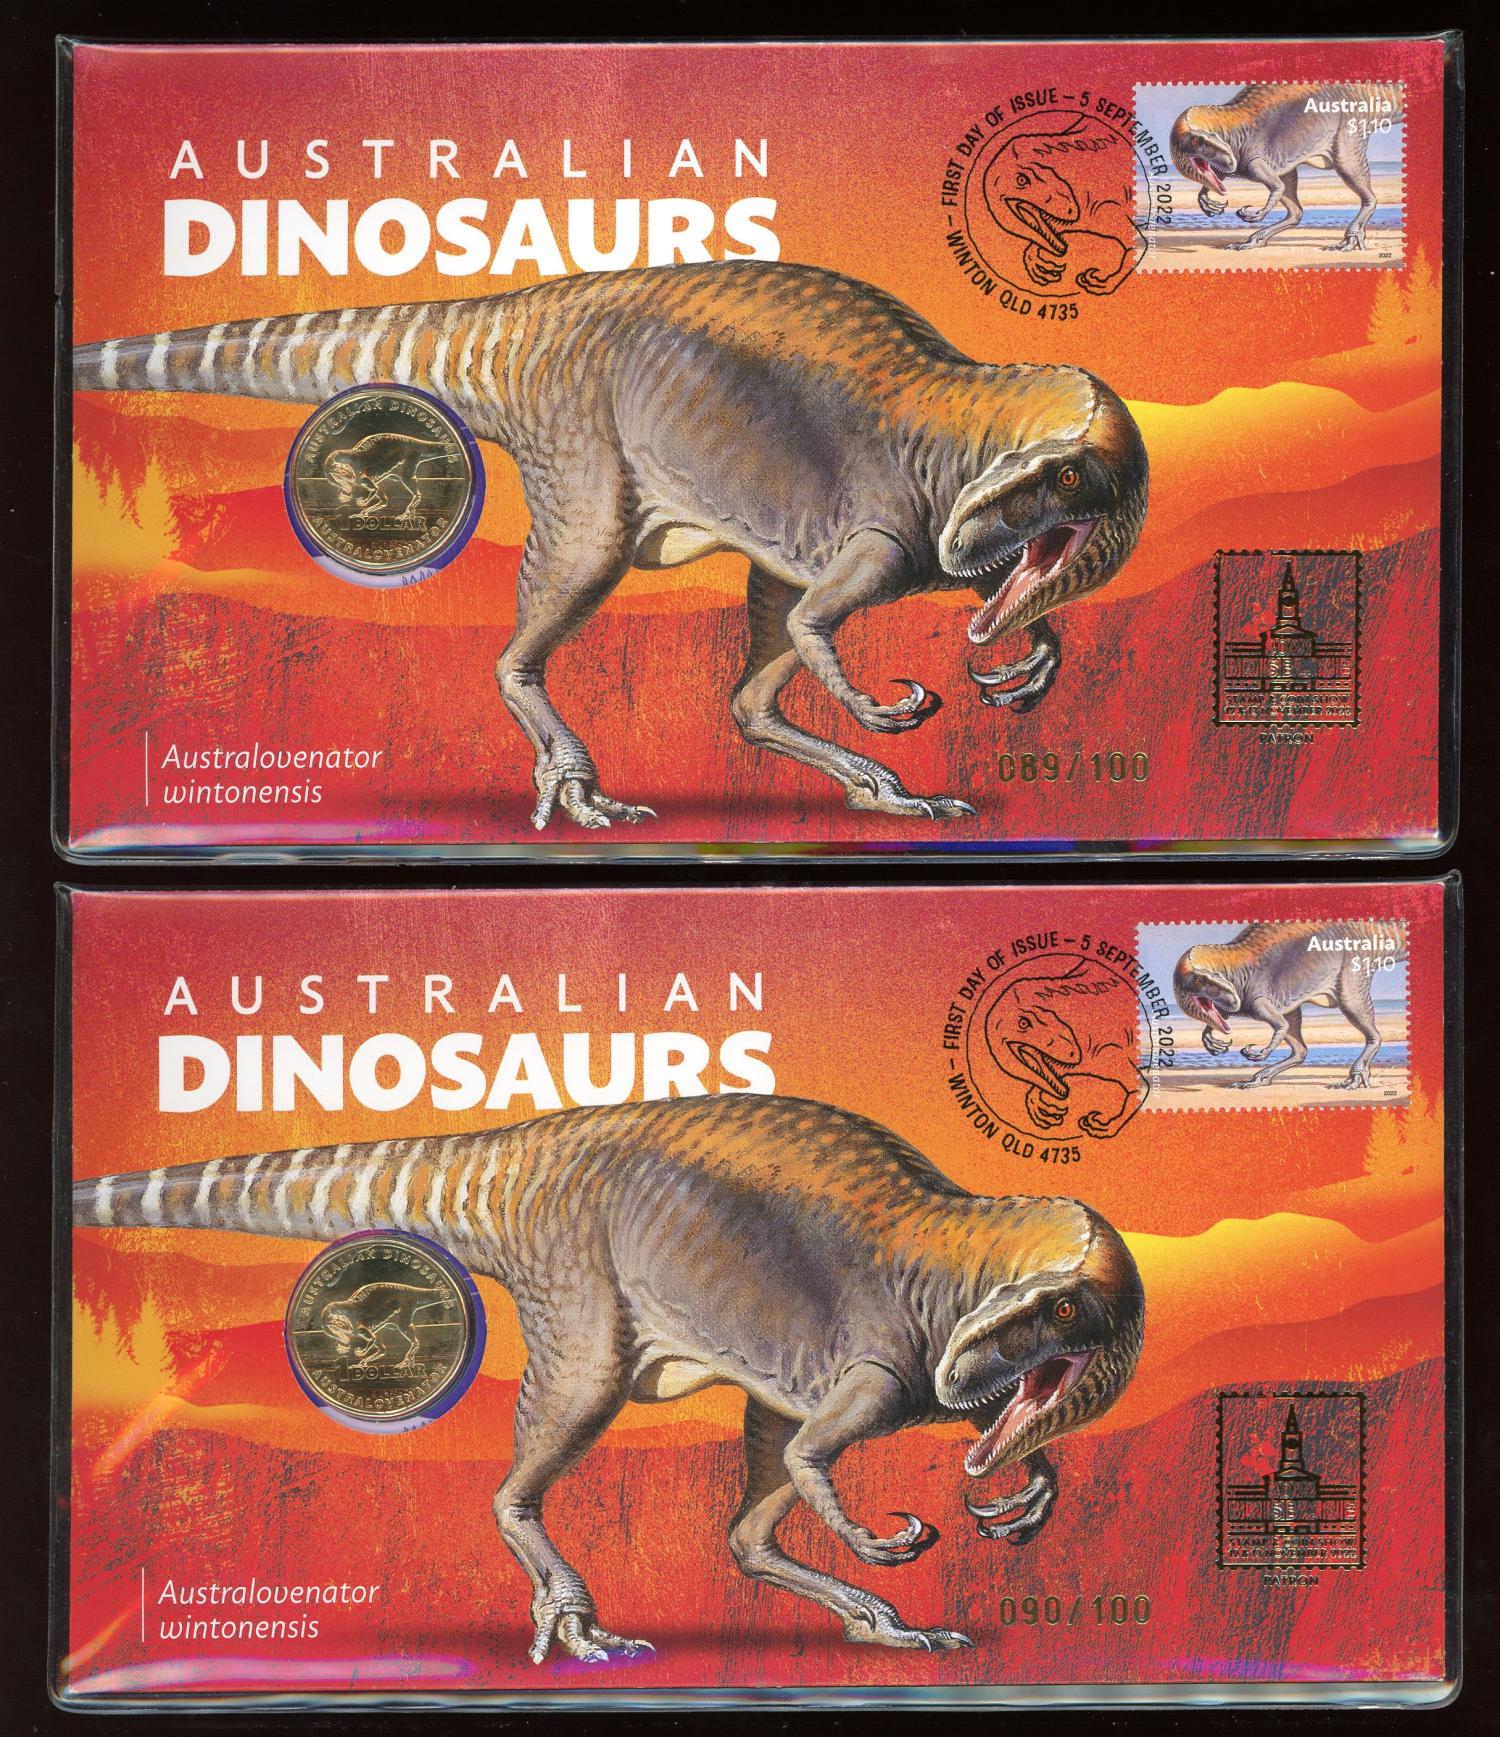 Thumbnail for 2022 Australian Dinosaurs PNC Consecutive Pair - Brisbane Stamp and Coin Show with Gold Foil Overprint 089 090-100